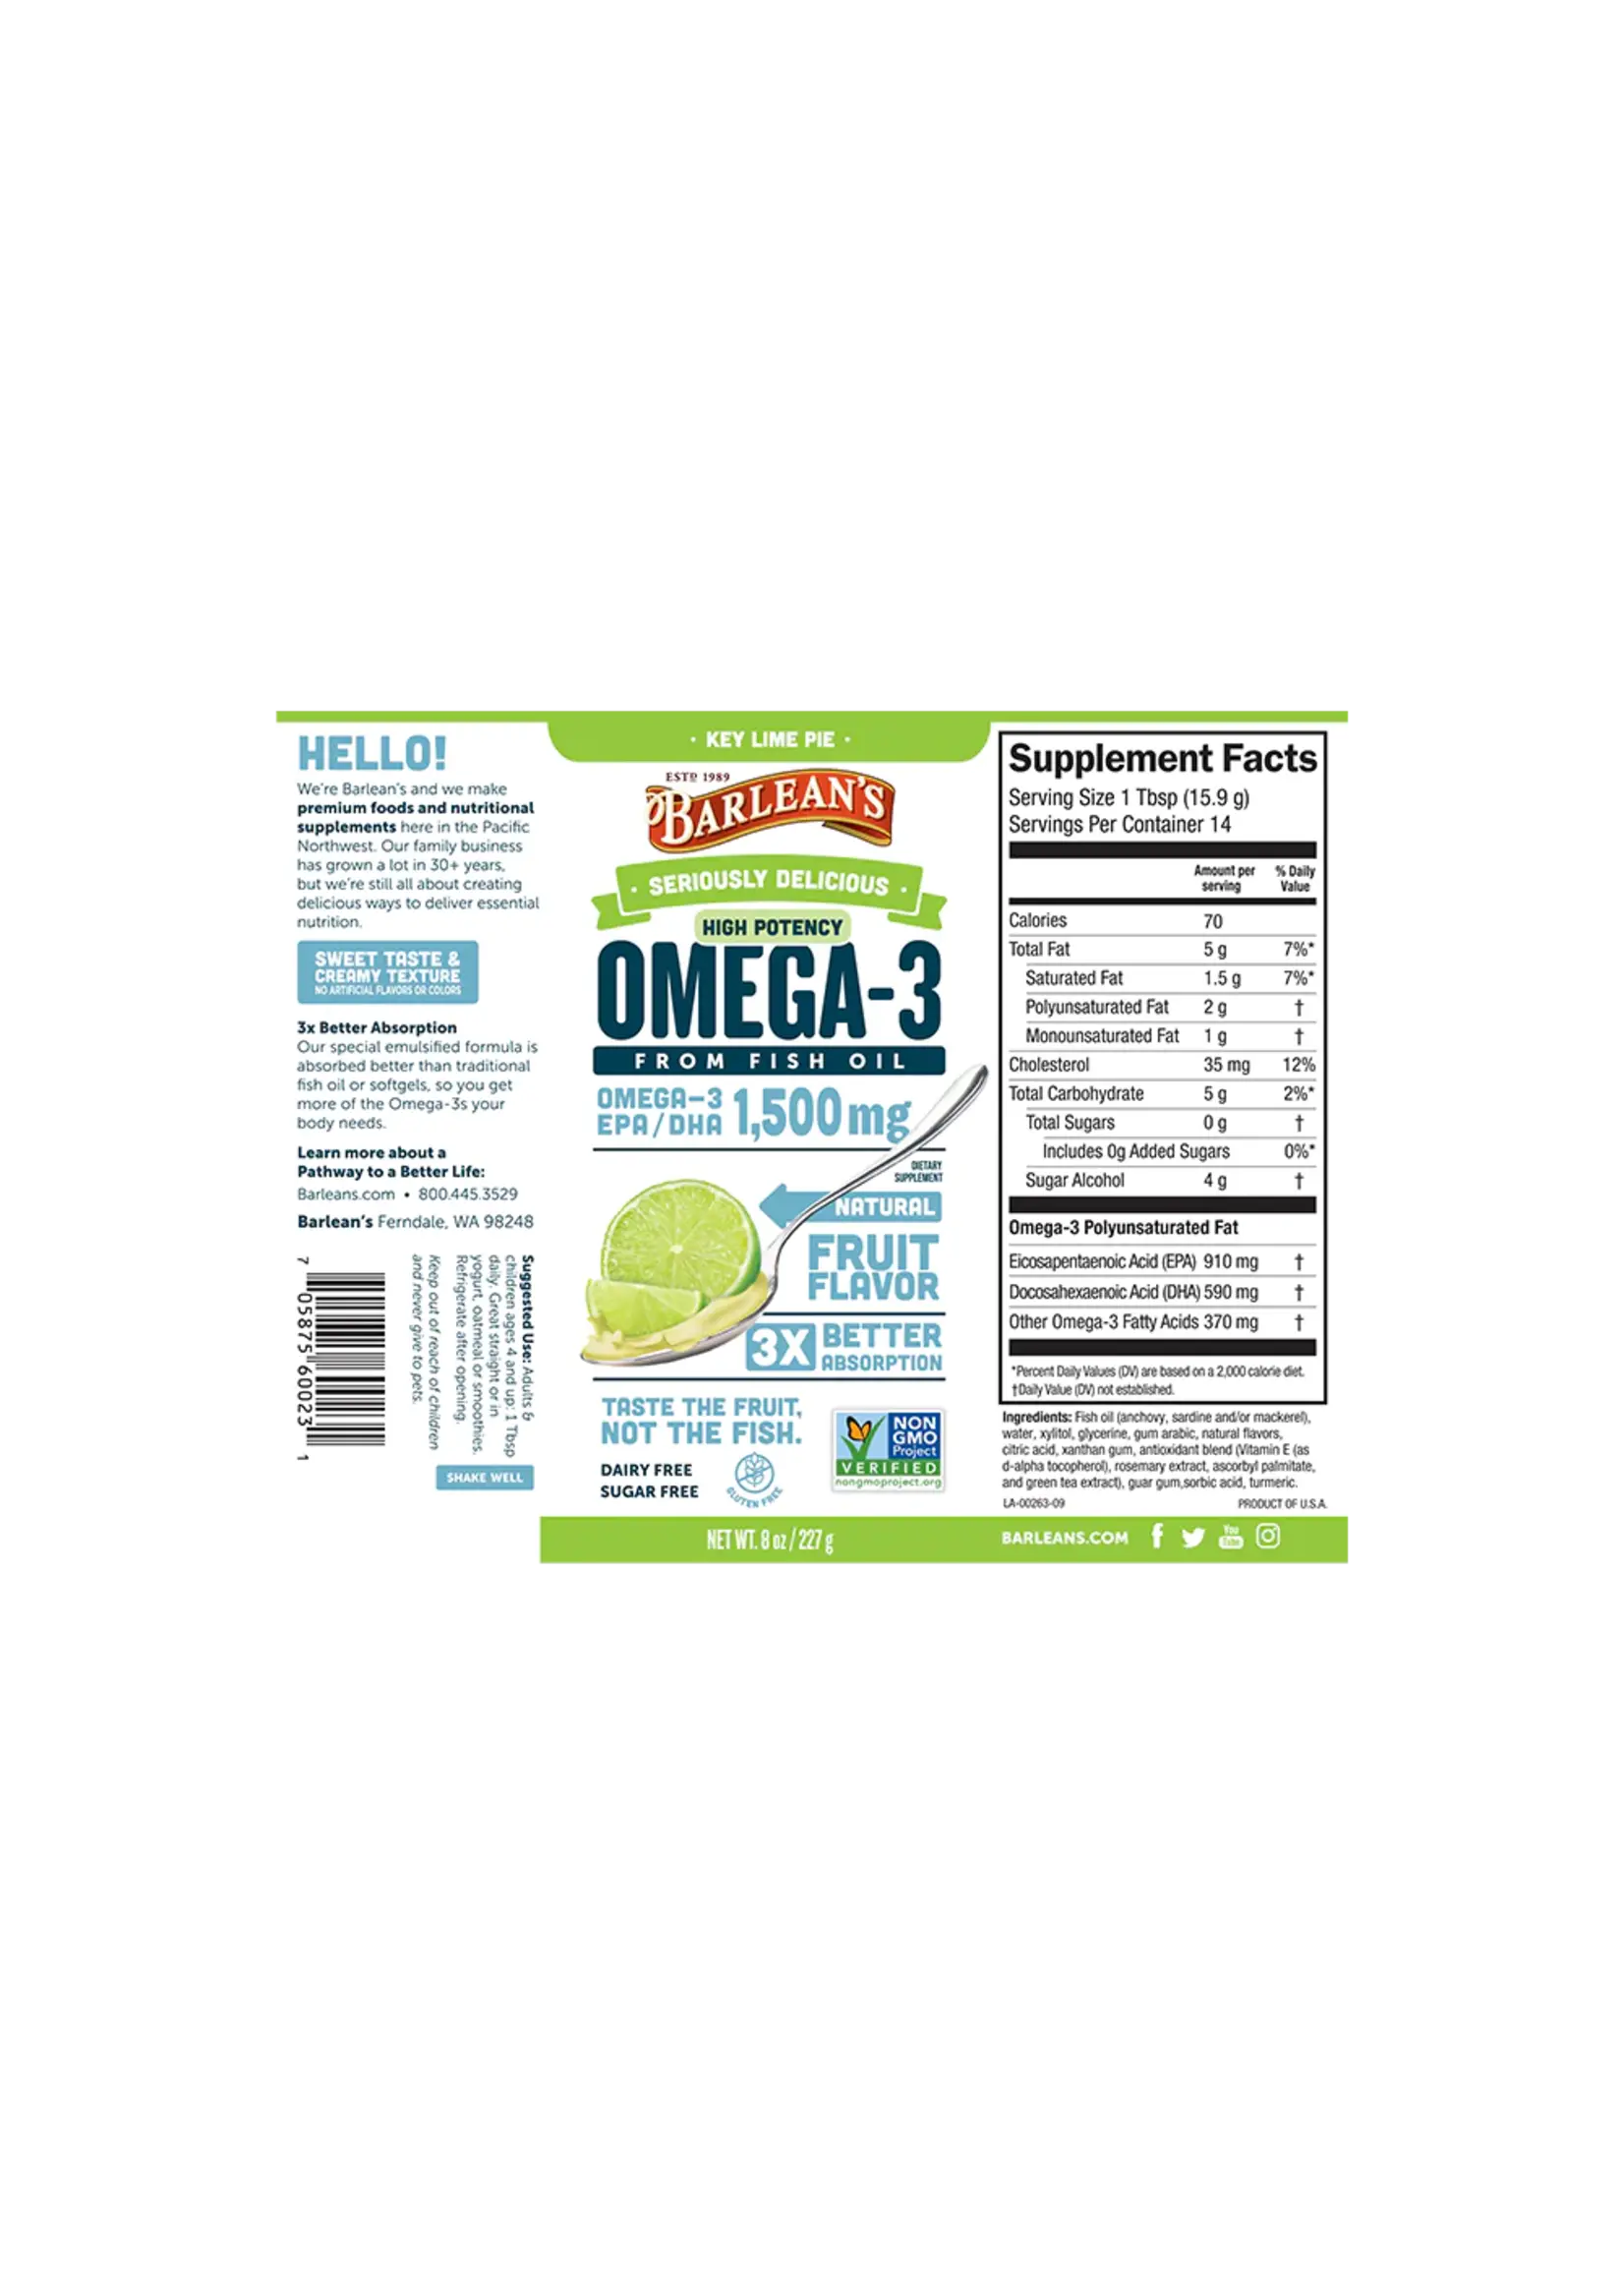 Seriously Delicious Omega-3 Fish Oil